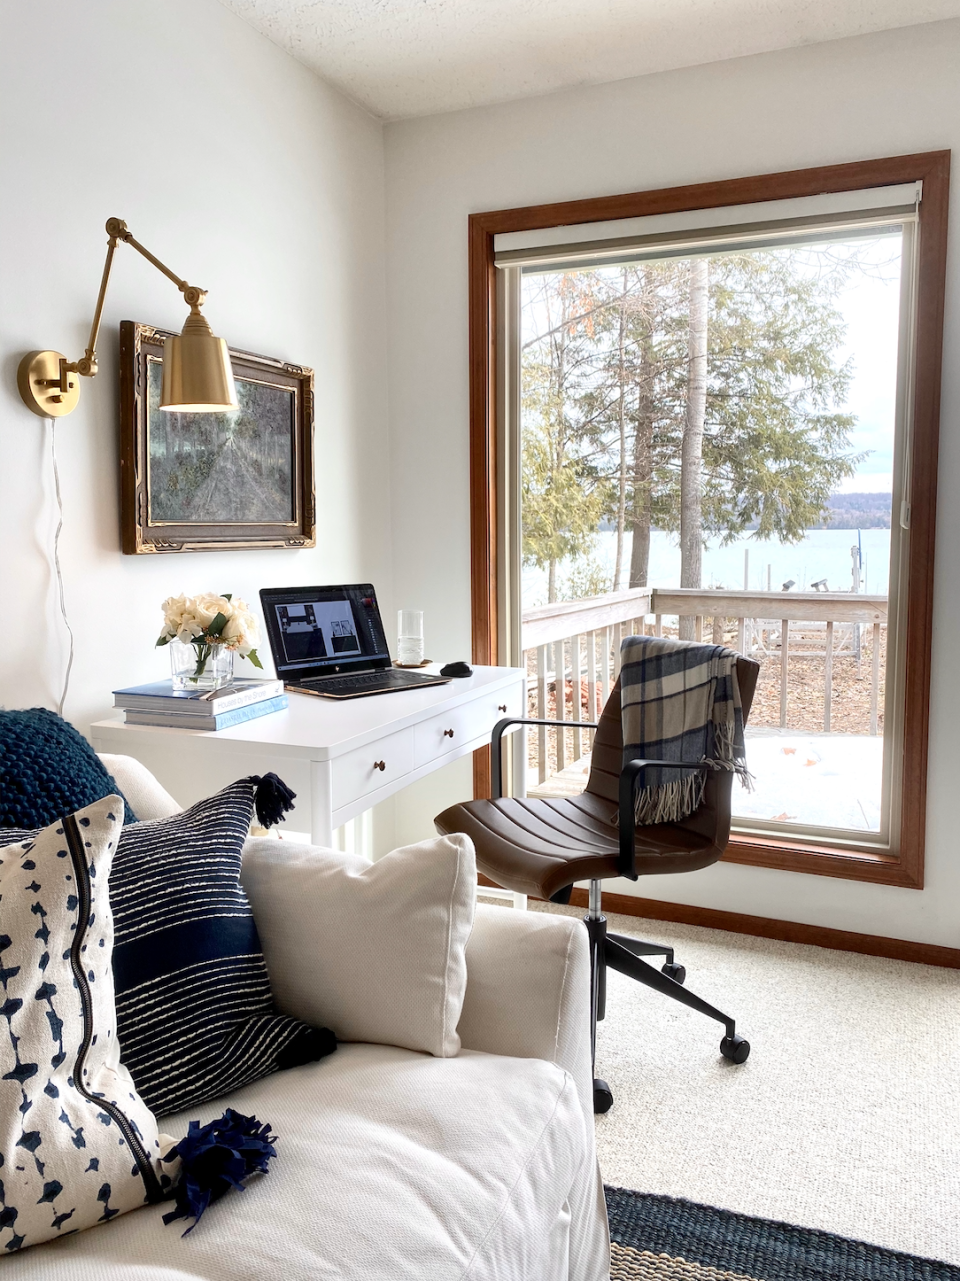 Position the desk so you can see outside—you’ll get the benefit of natural light and a pretty view. (Photo: Havenly)